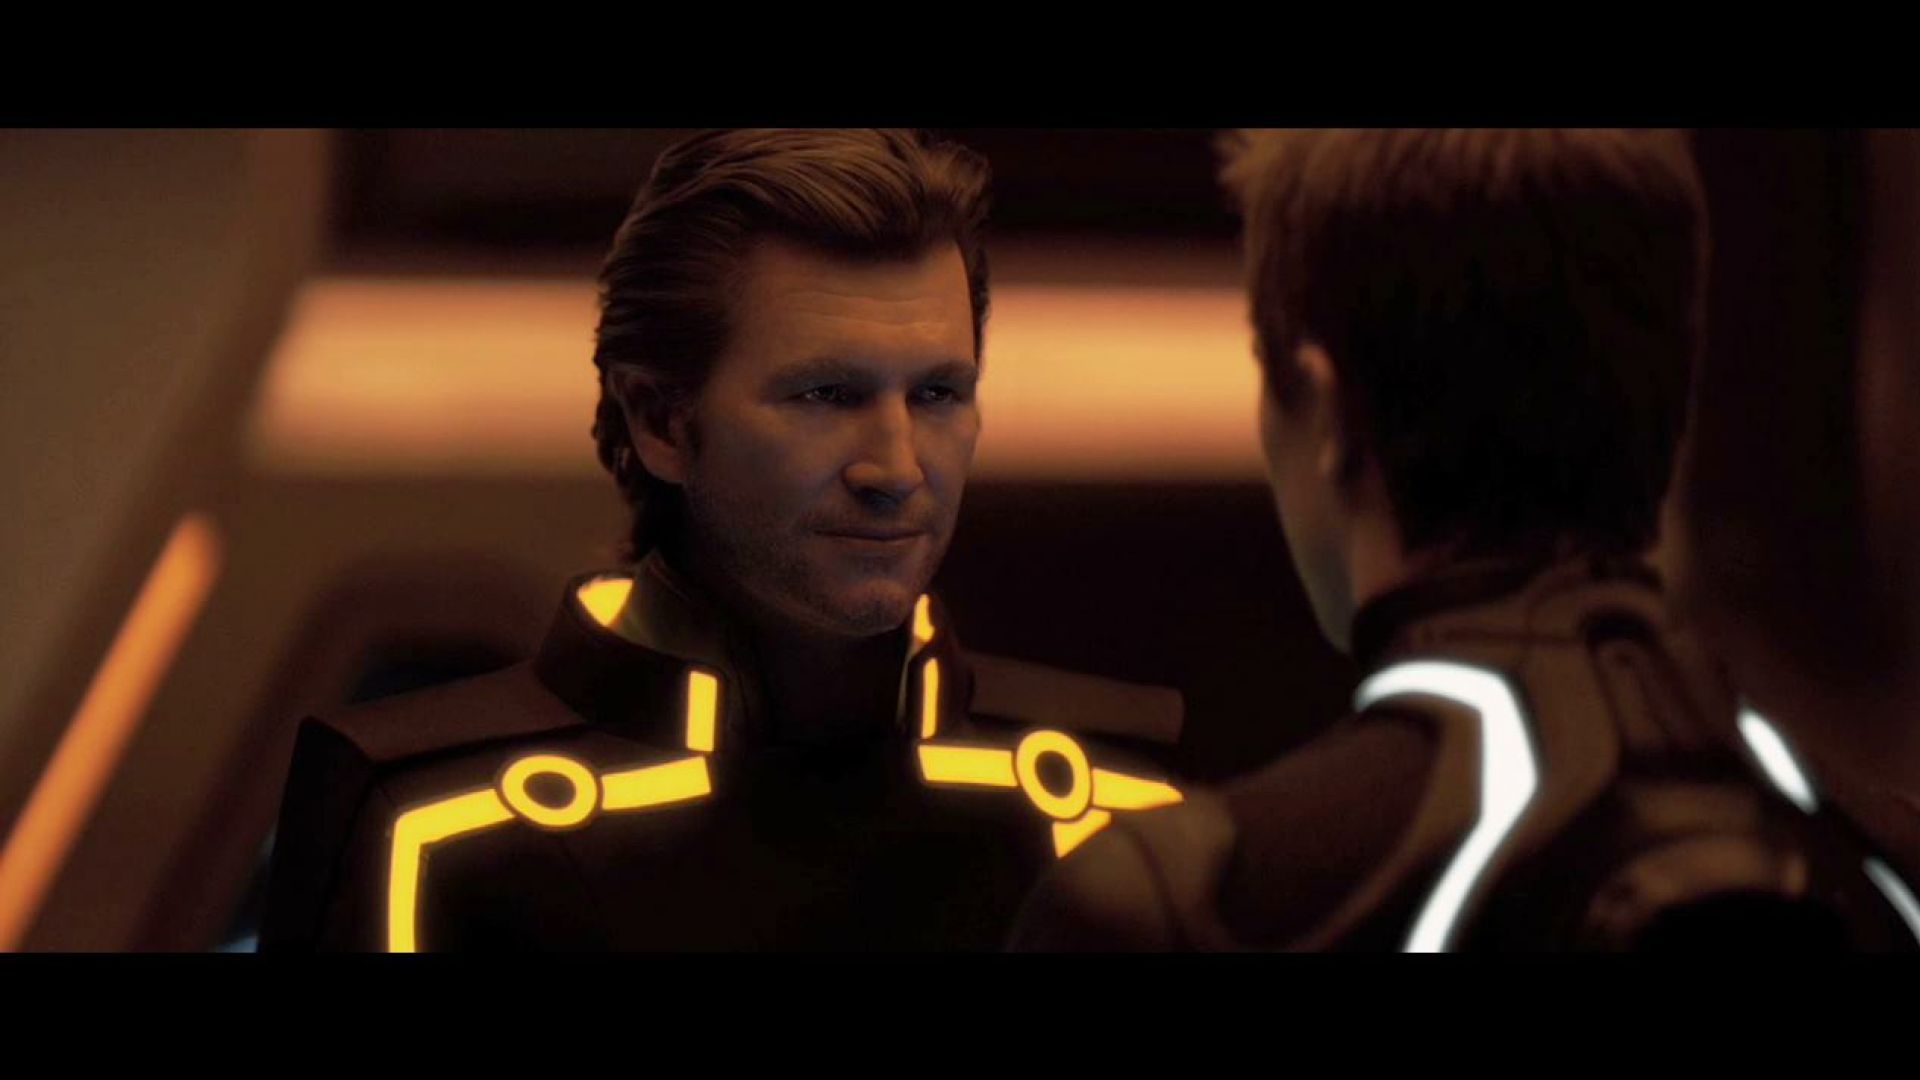 What Did You Do To Him!? Tron: Legacy